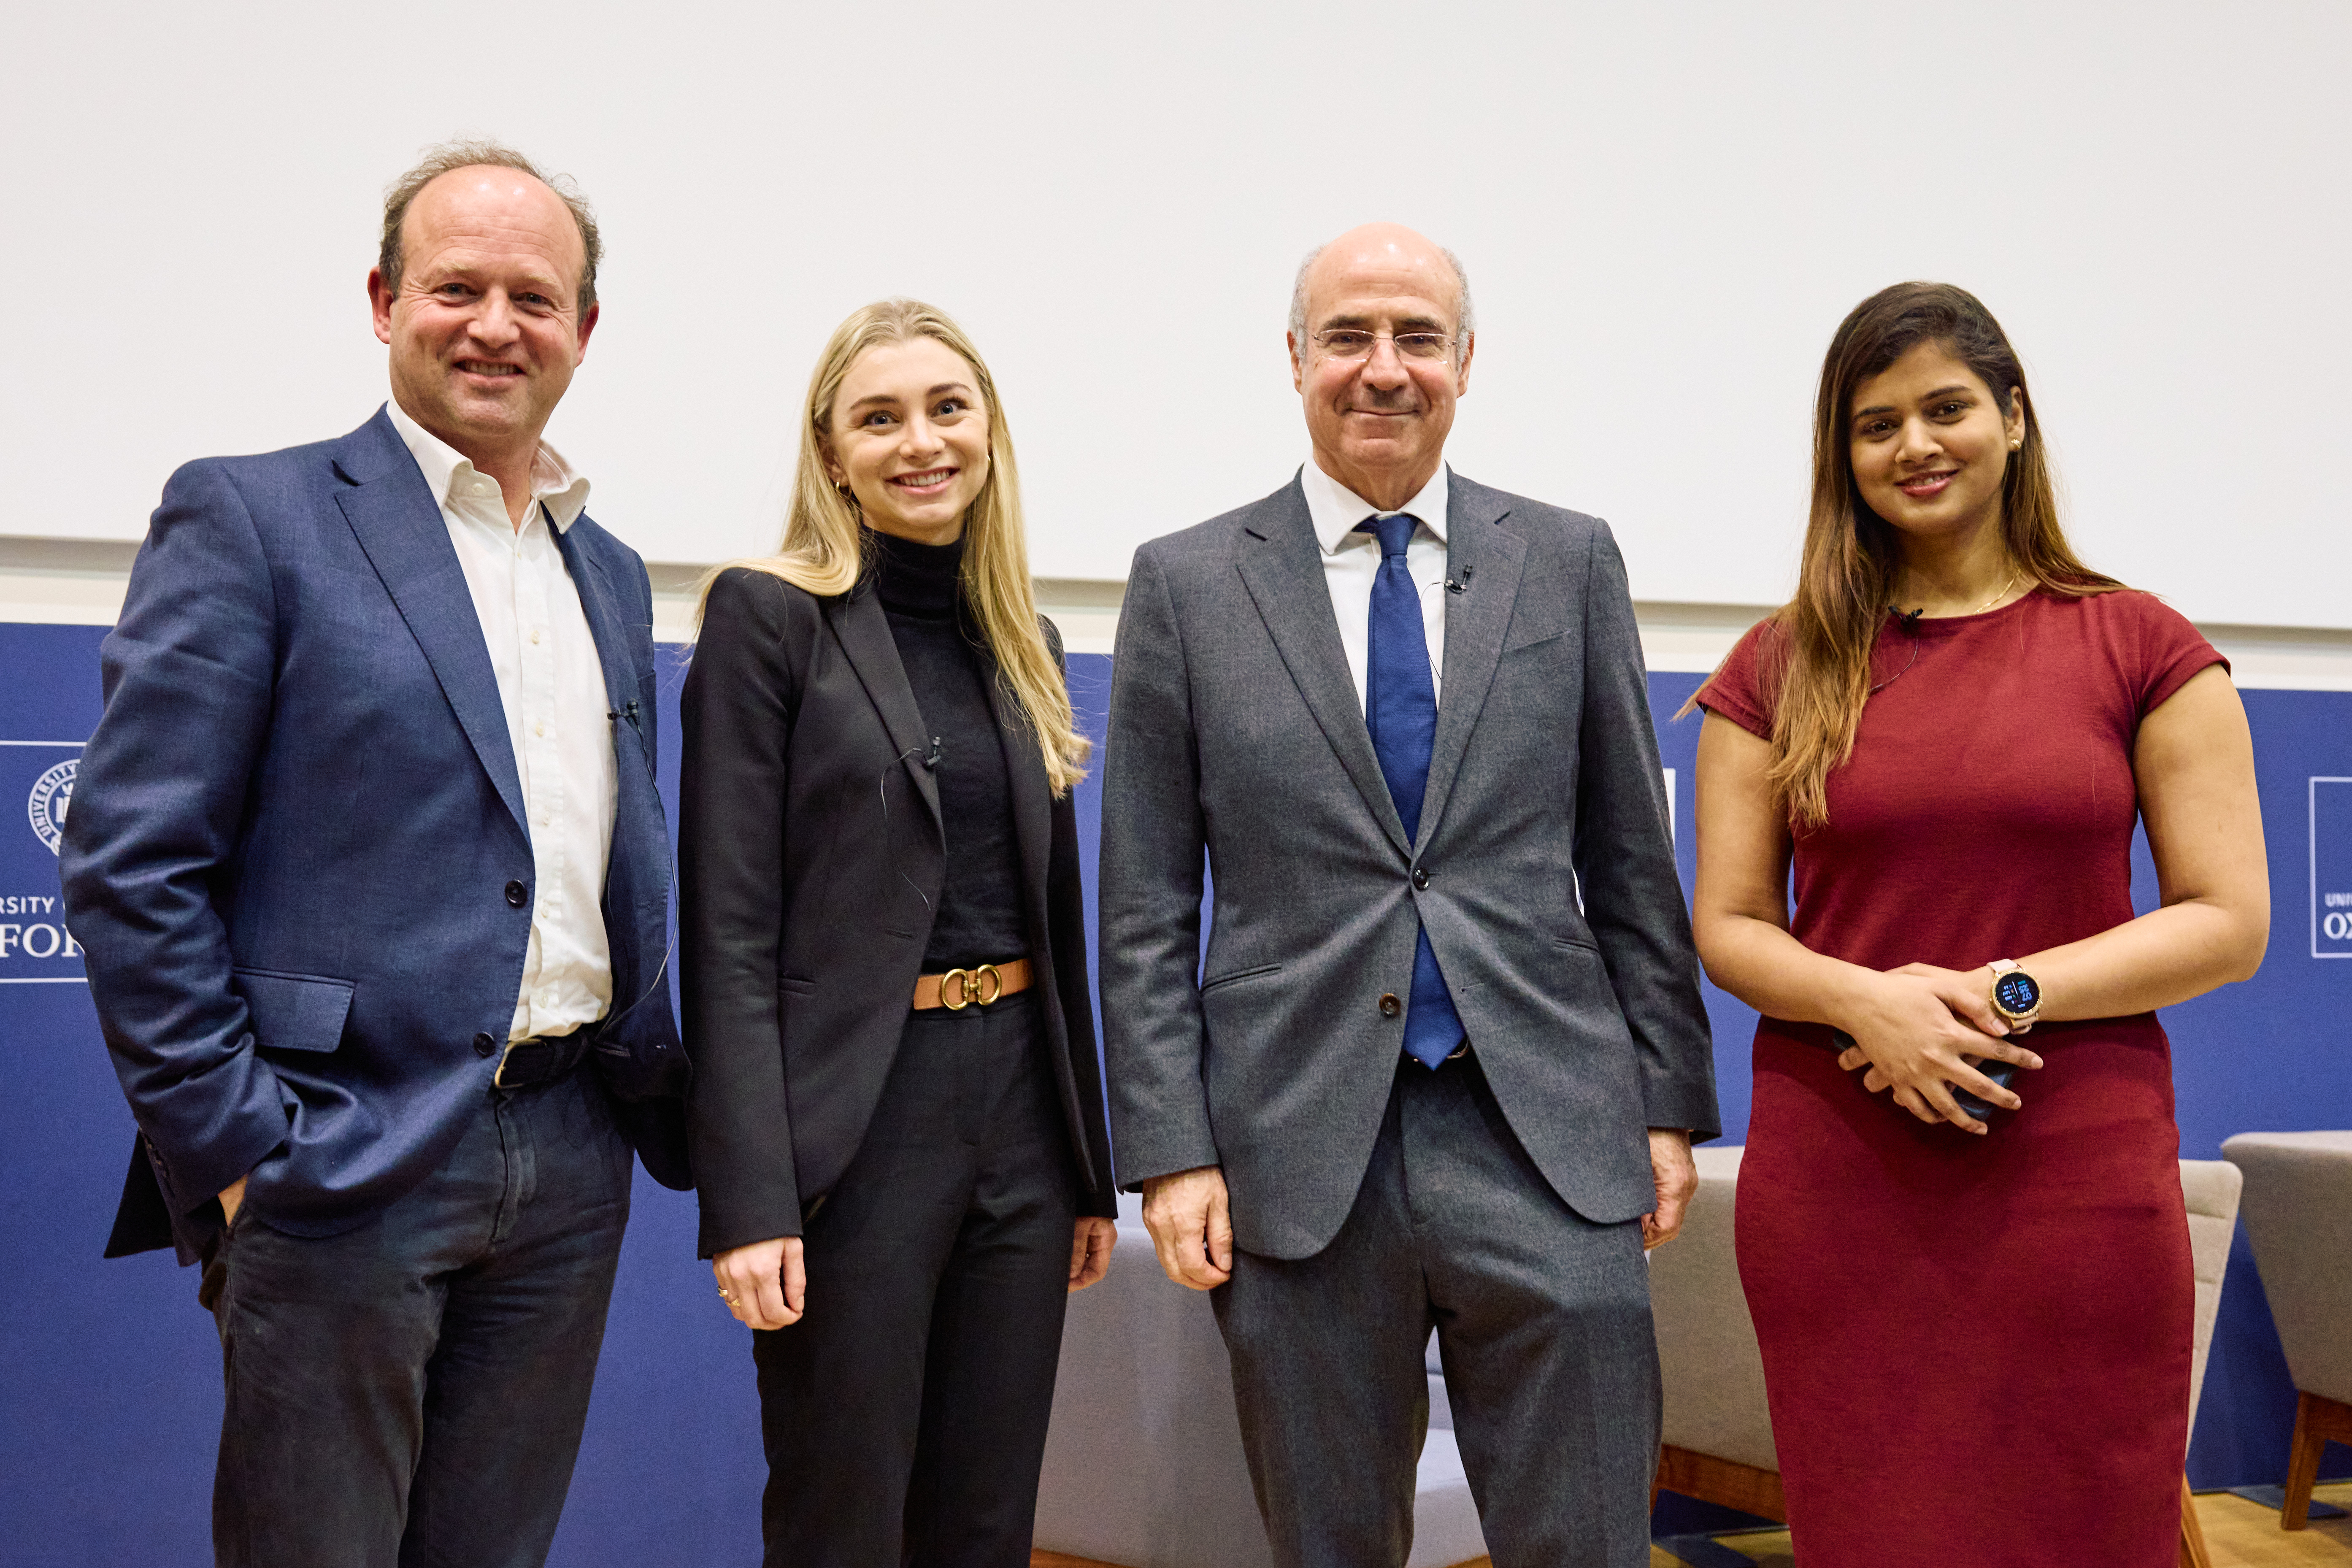 Host and speakers at Bill Browder event